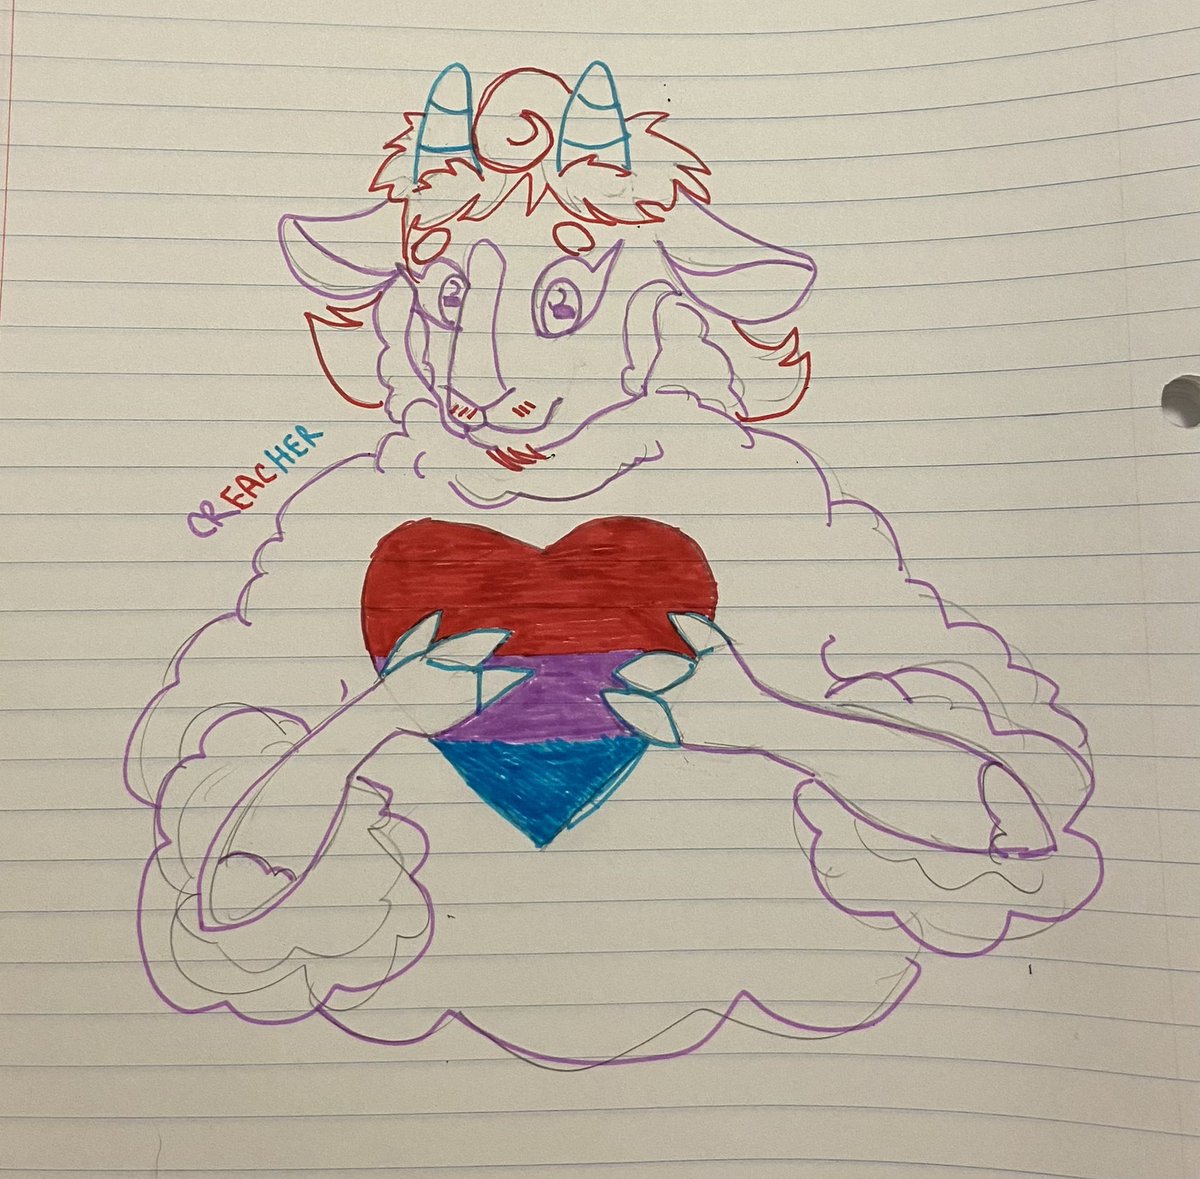 Quick, silly, and late—happy belated birthday, fellow bisexuals #BiVisibilityDay #furry